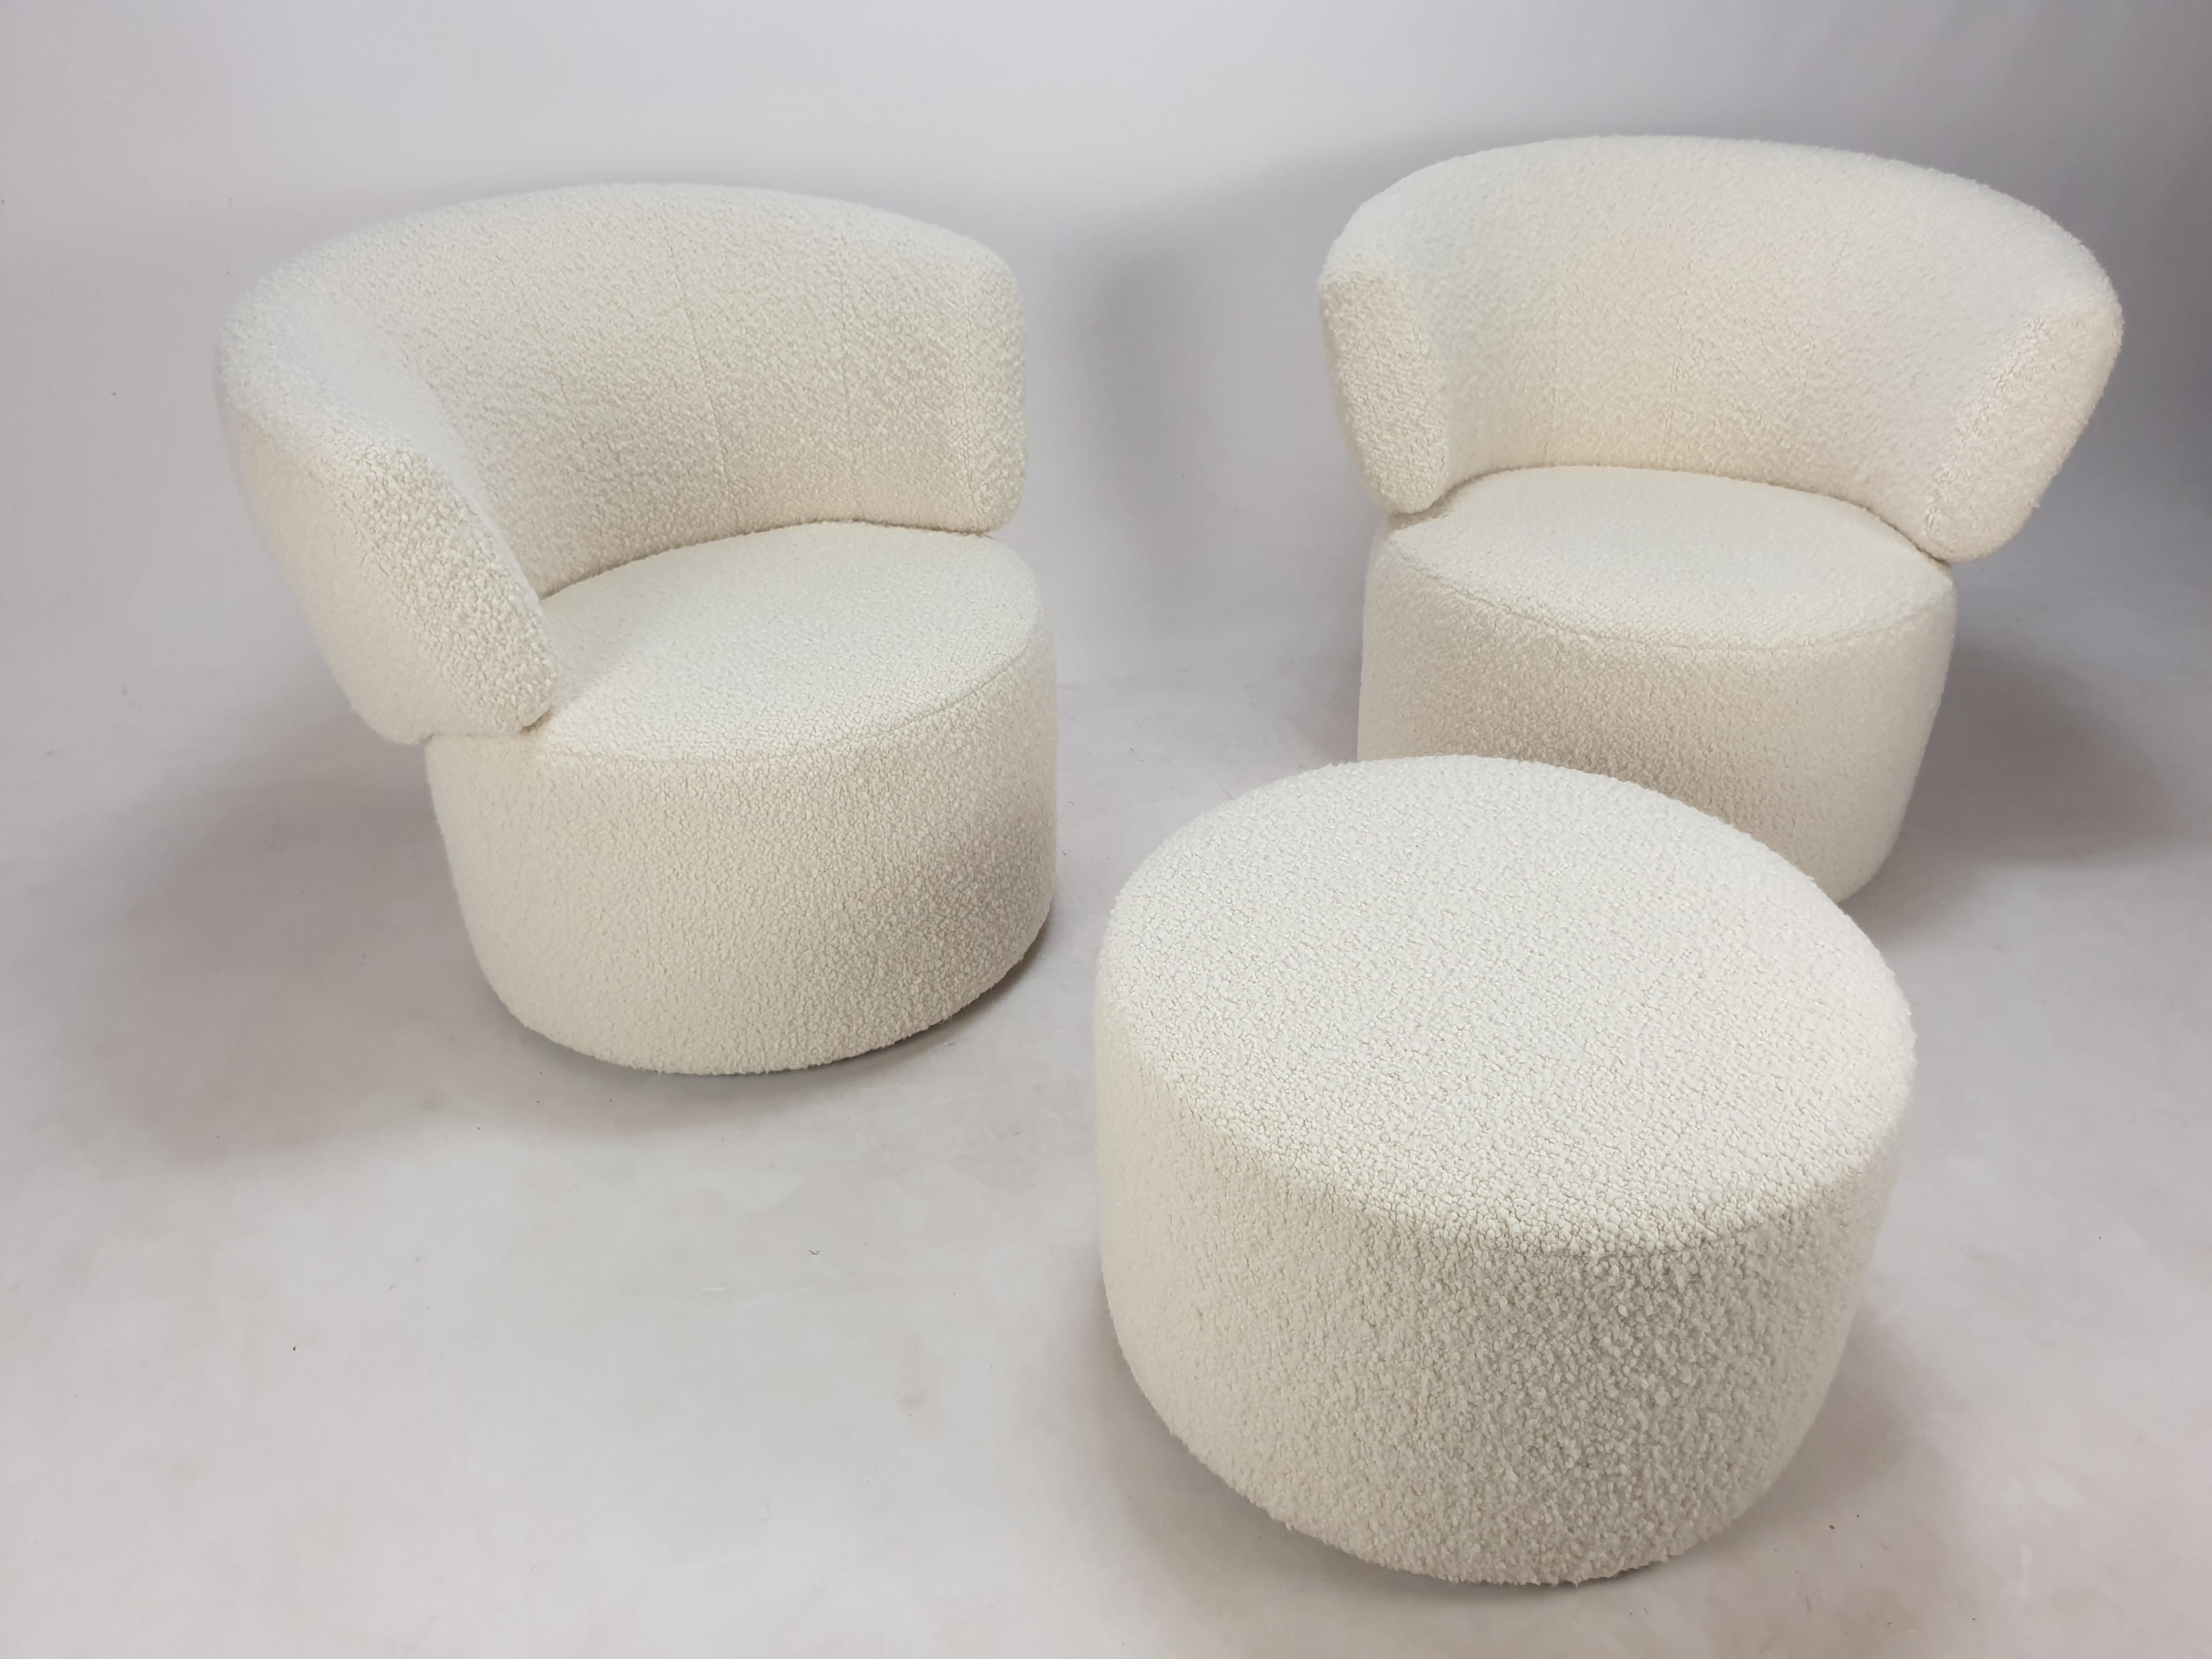 Lovely set of two club chairs and one pouf, manufactured by Rolf Benz Germany.

This Rolf Benz set is very solid and is made with the best materials.
The comfortable chairs have a turning back system.

The set is just reupholstered with very